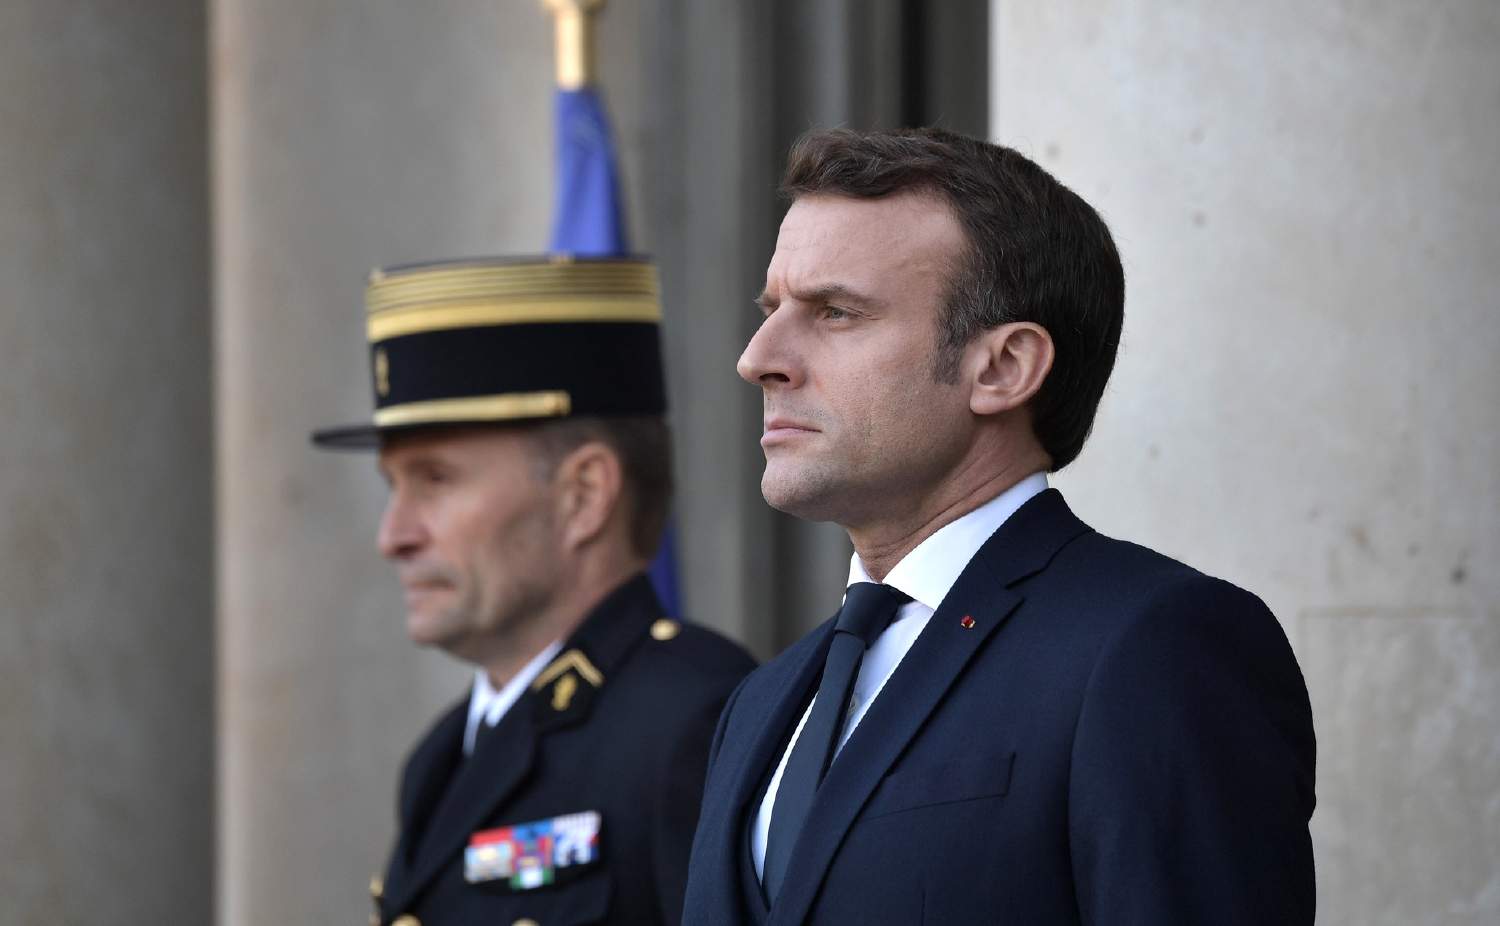 Macron faces an uphill battle for the presidency as letter exposes the deep divides in French society